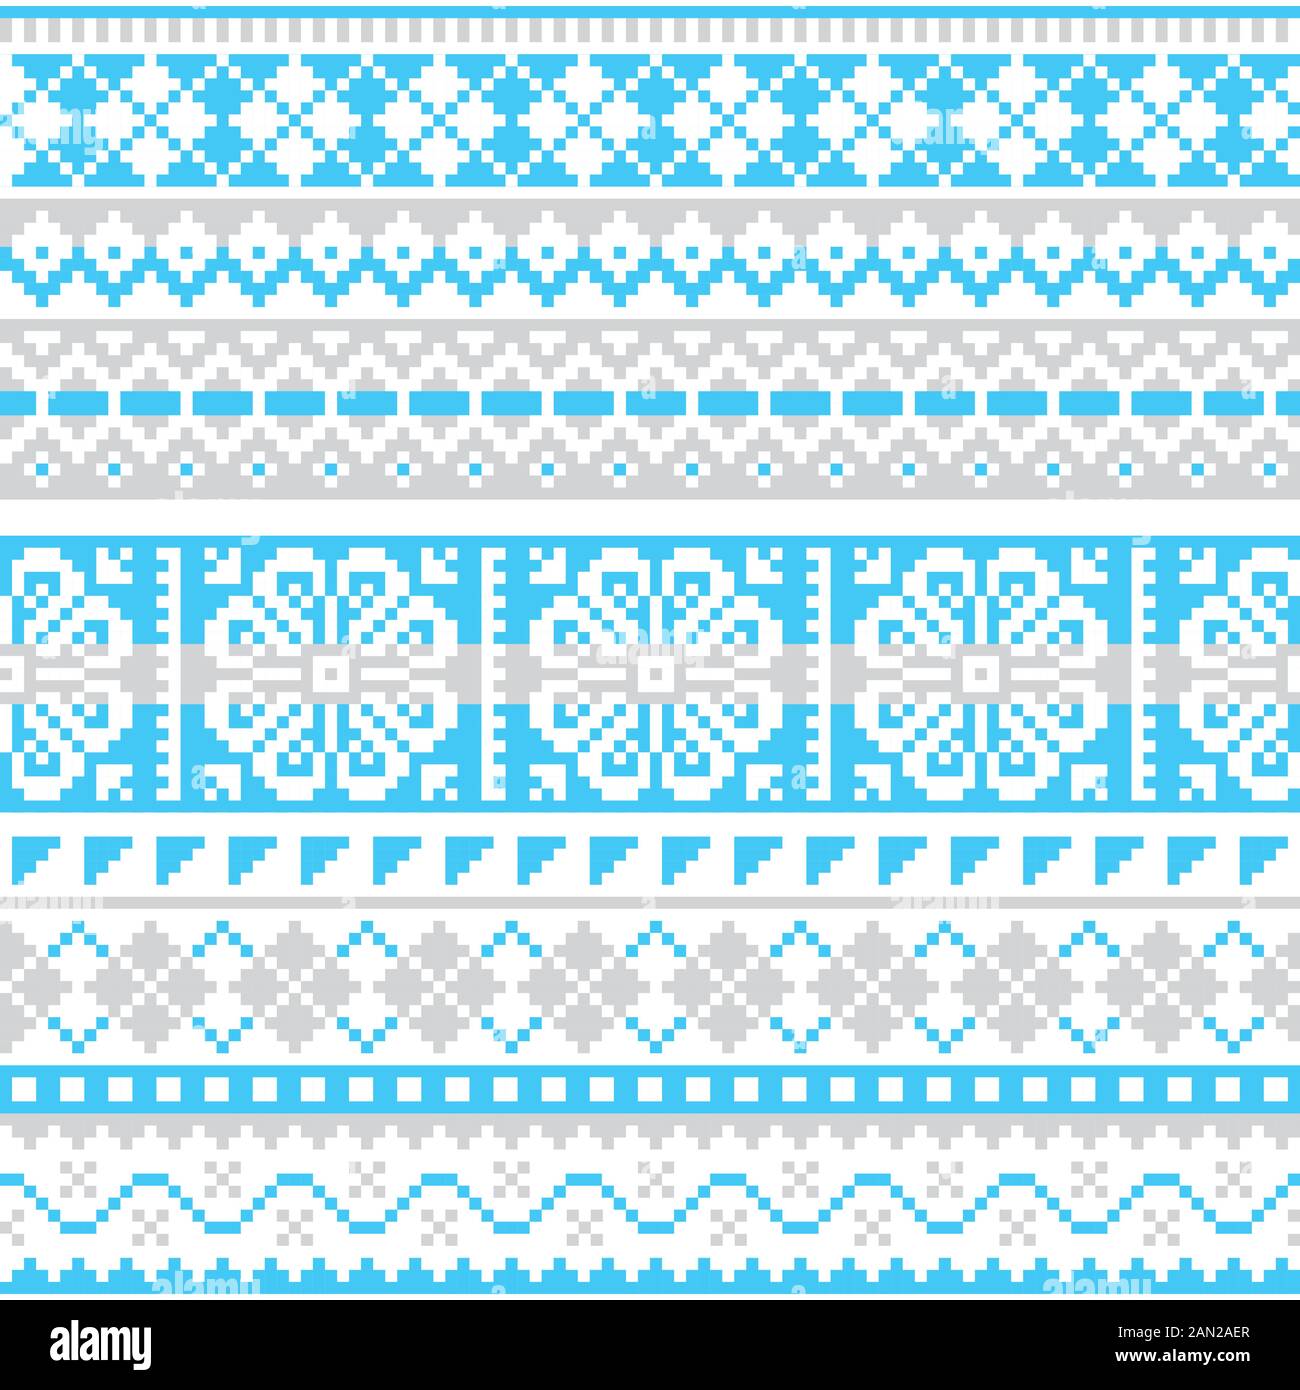 Fair Isle knit winter traditional vector seamless pattern, Scottish repetitive design, Shetland islands knitting style in gray and white Stock Vector